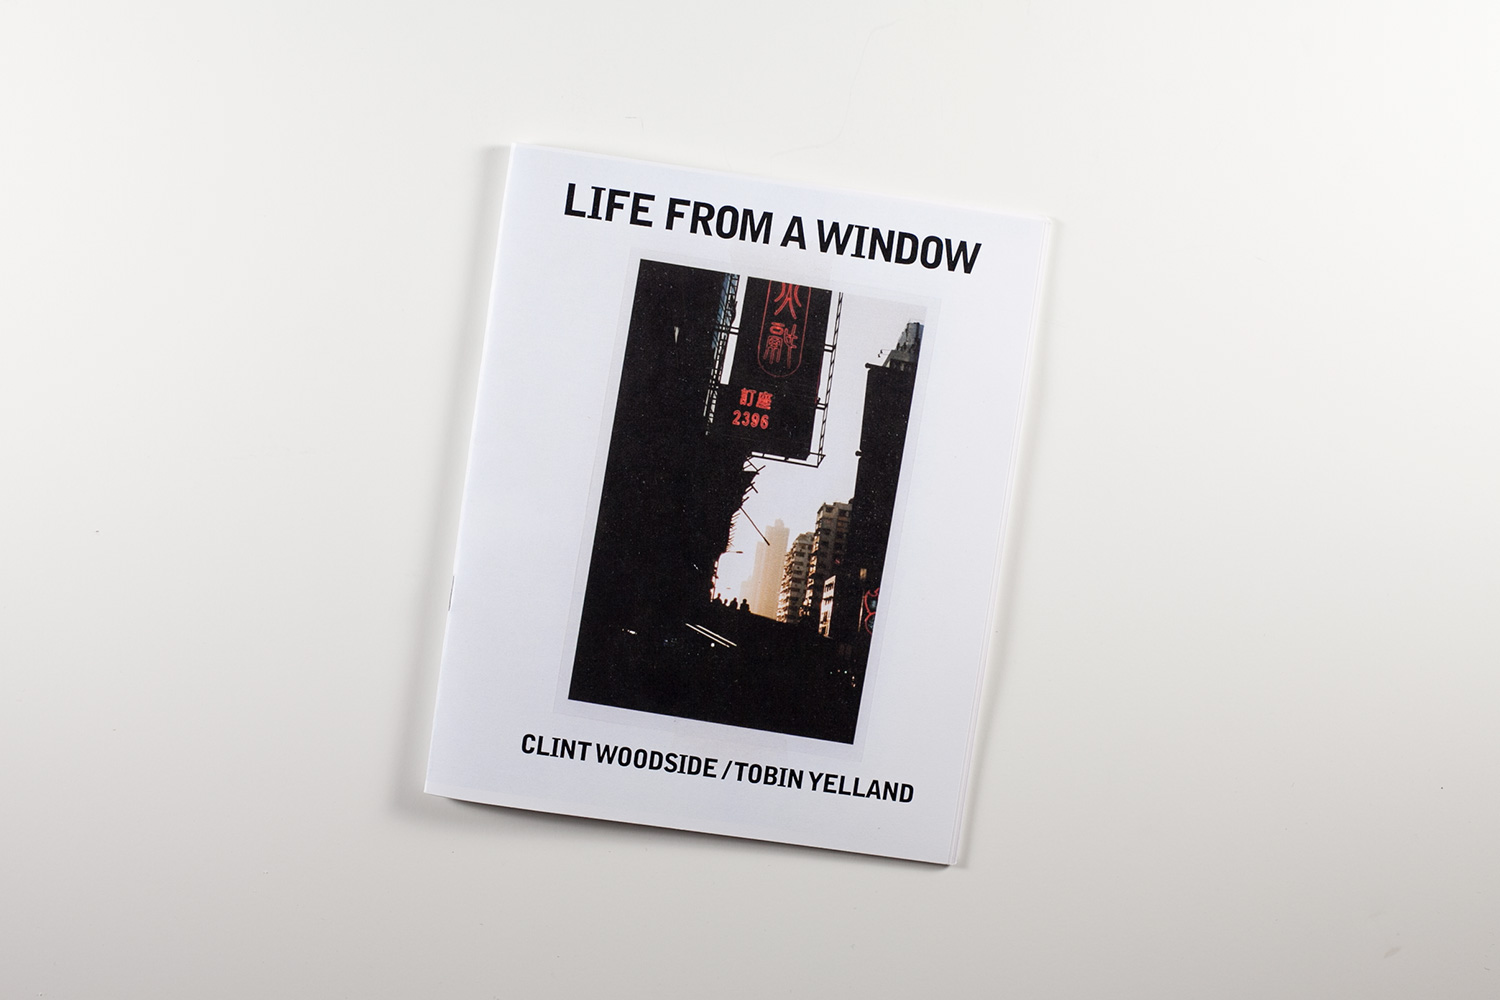   Clint Woodside / Tobin Yelland -  Life From A Window    40 pg. full color photo zine.  Color Laser Print 2 4" x 6" Prints included 8.5” x 7”   Edition of 100 Out of print   Clint Woodside &amp; Tobin Yelland's travel log in Asia.  